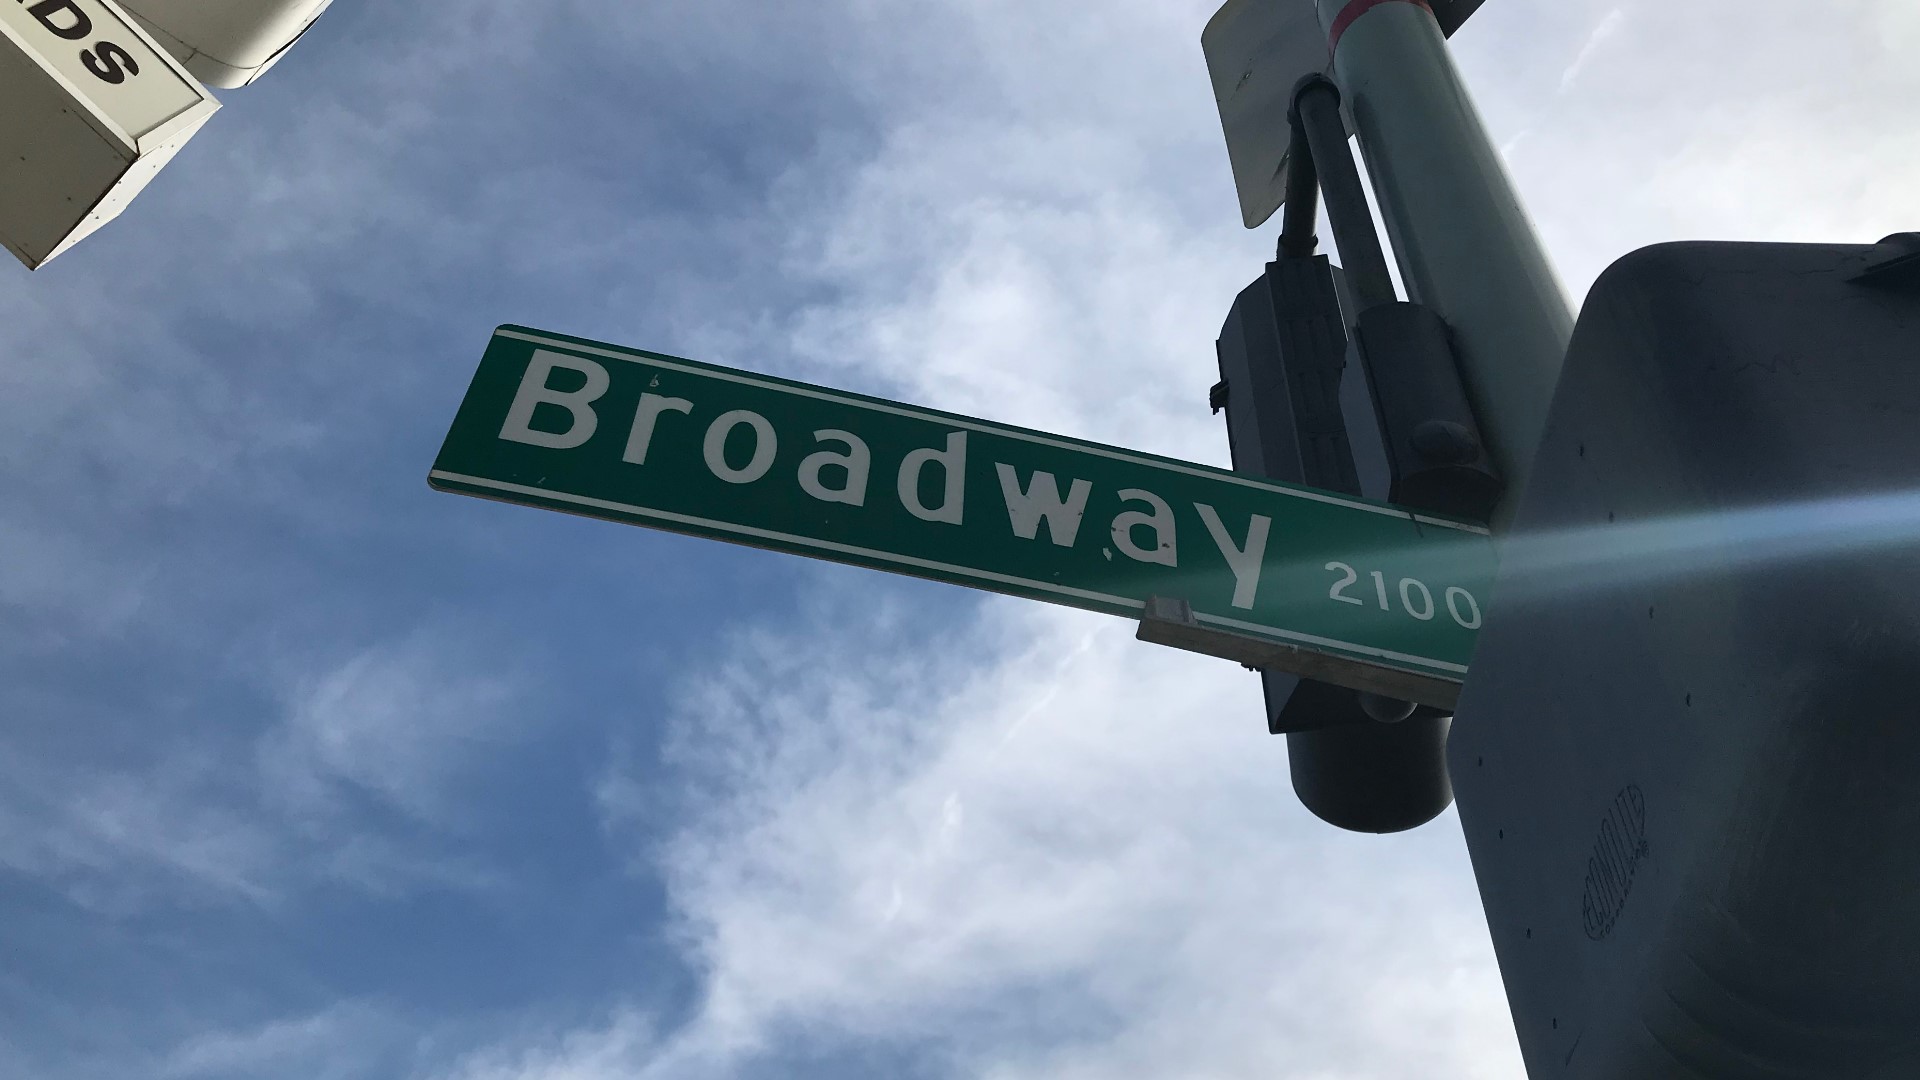 The City of Sacramento filed a civil lawsuit to ban seven individuals from the area around the Broadway Corridor. This ban would extend from roughly Highway 99 to Ninth Street.